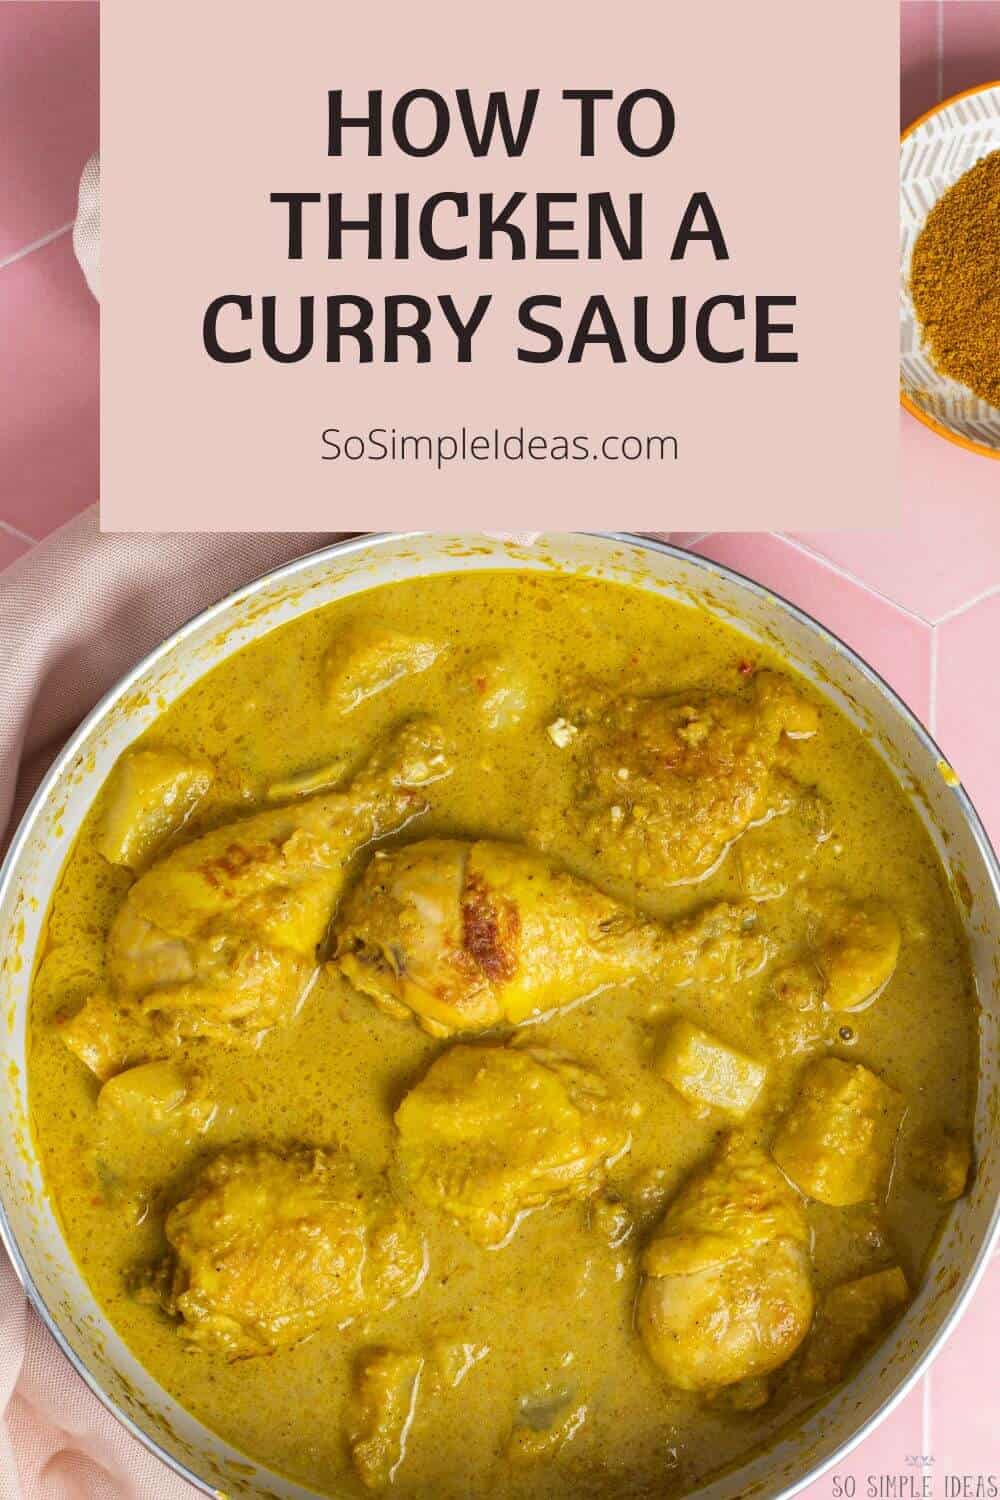 how to thicken curry sauce pinterest image.